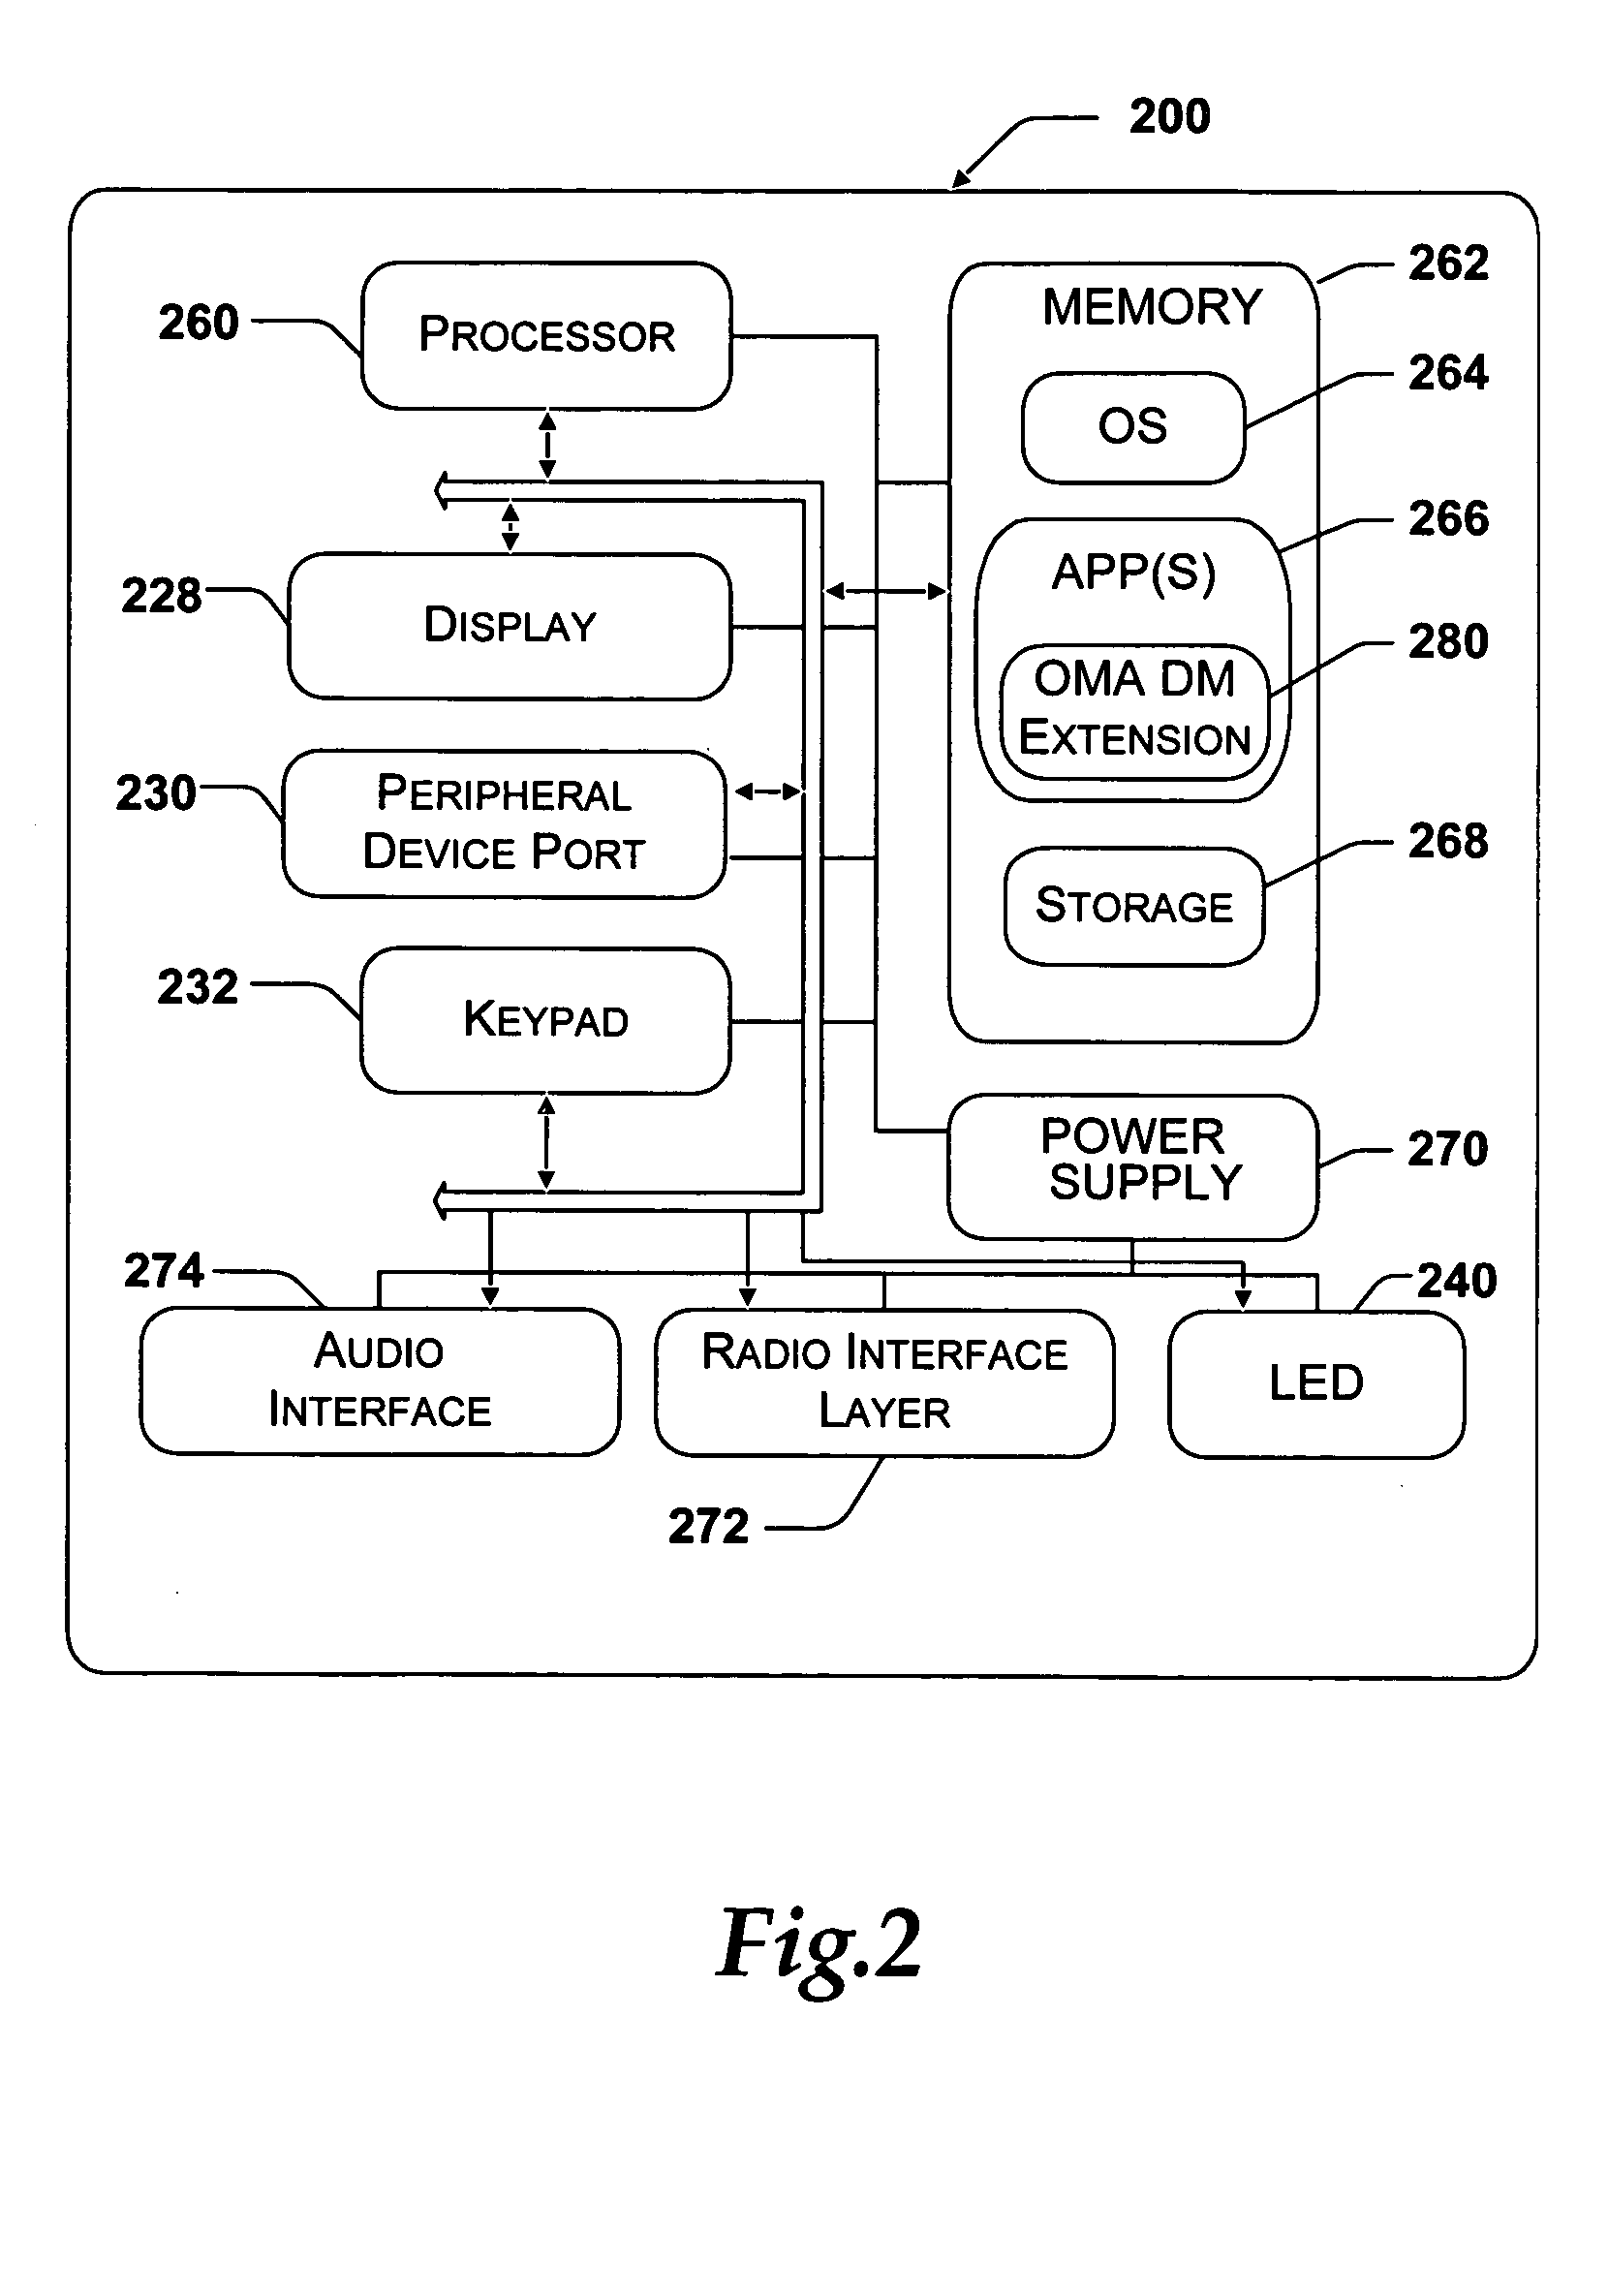 System and method for an OMA DM extension to manage mobile device configuration settings